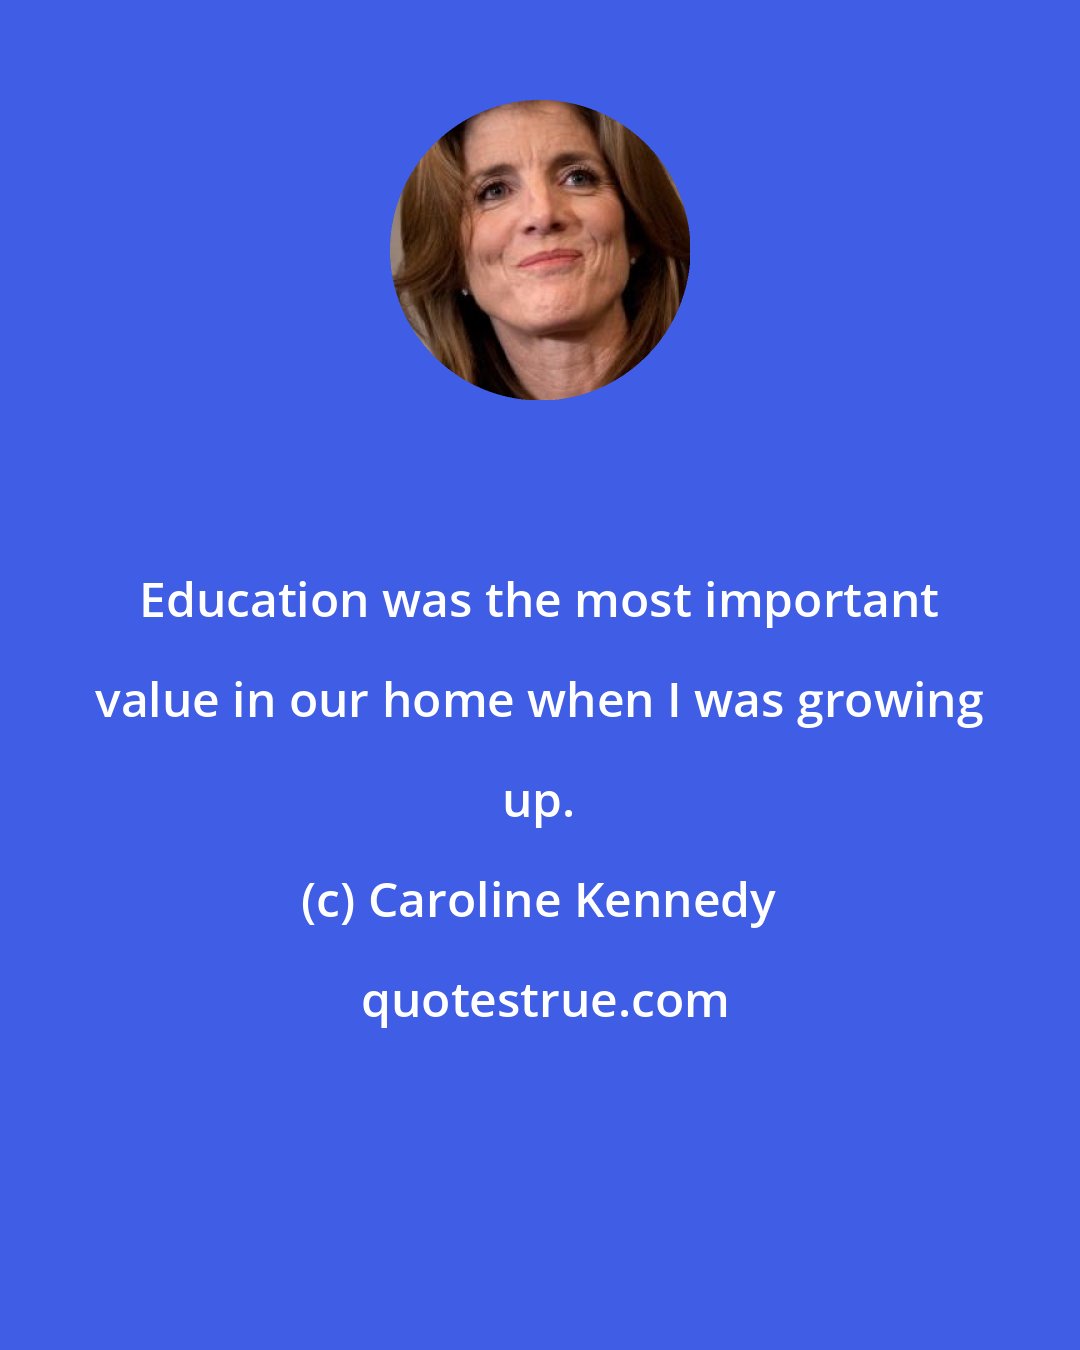 Caroline Kennedy: Education was the most important value in our home when I was growing up.